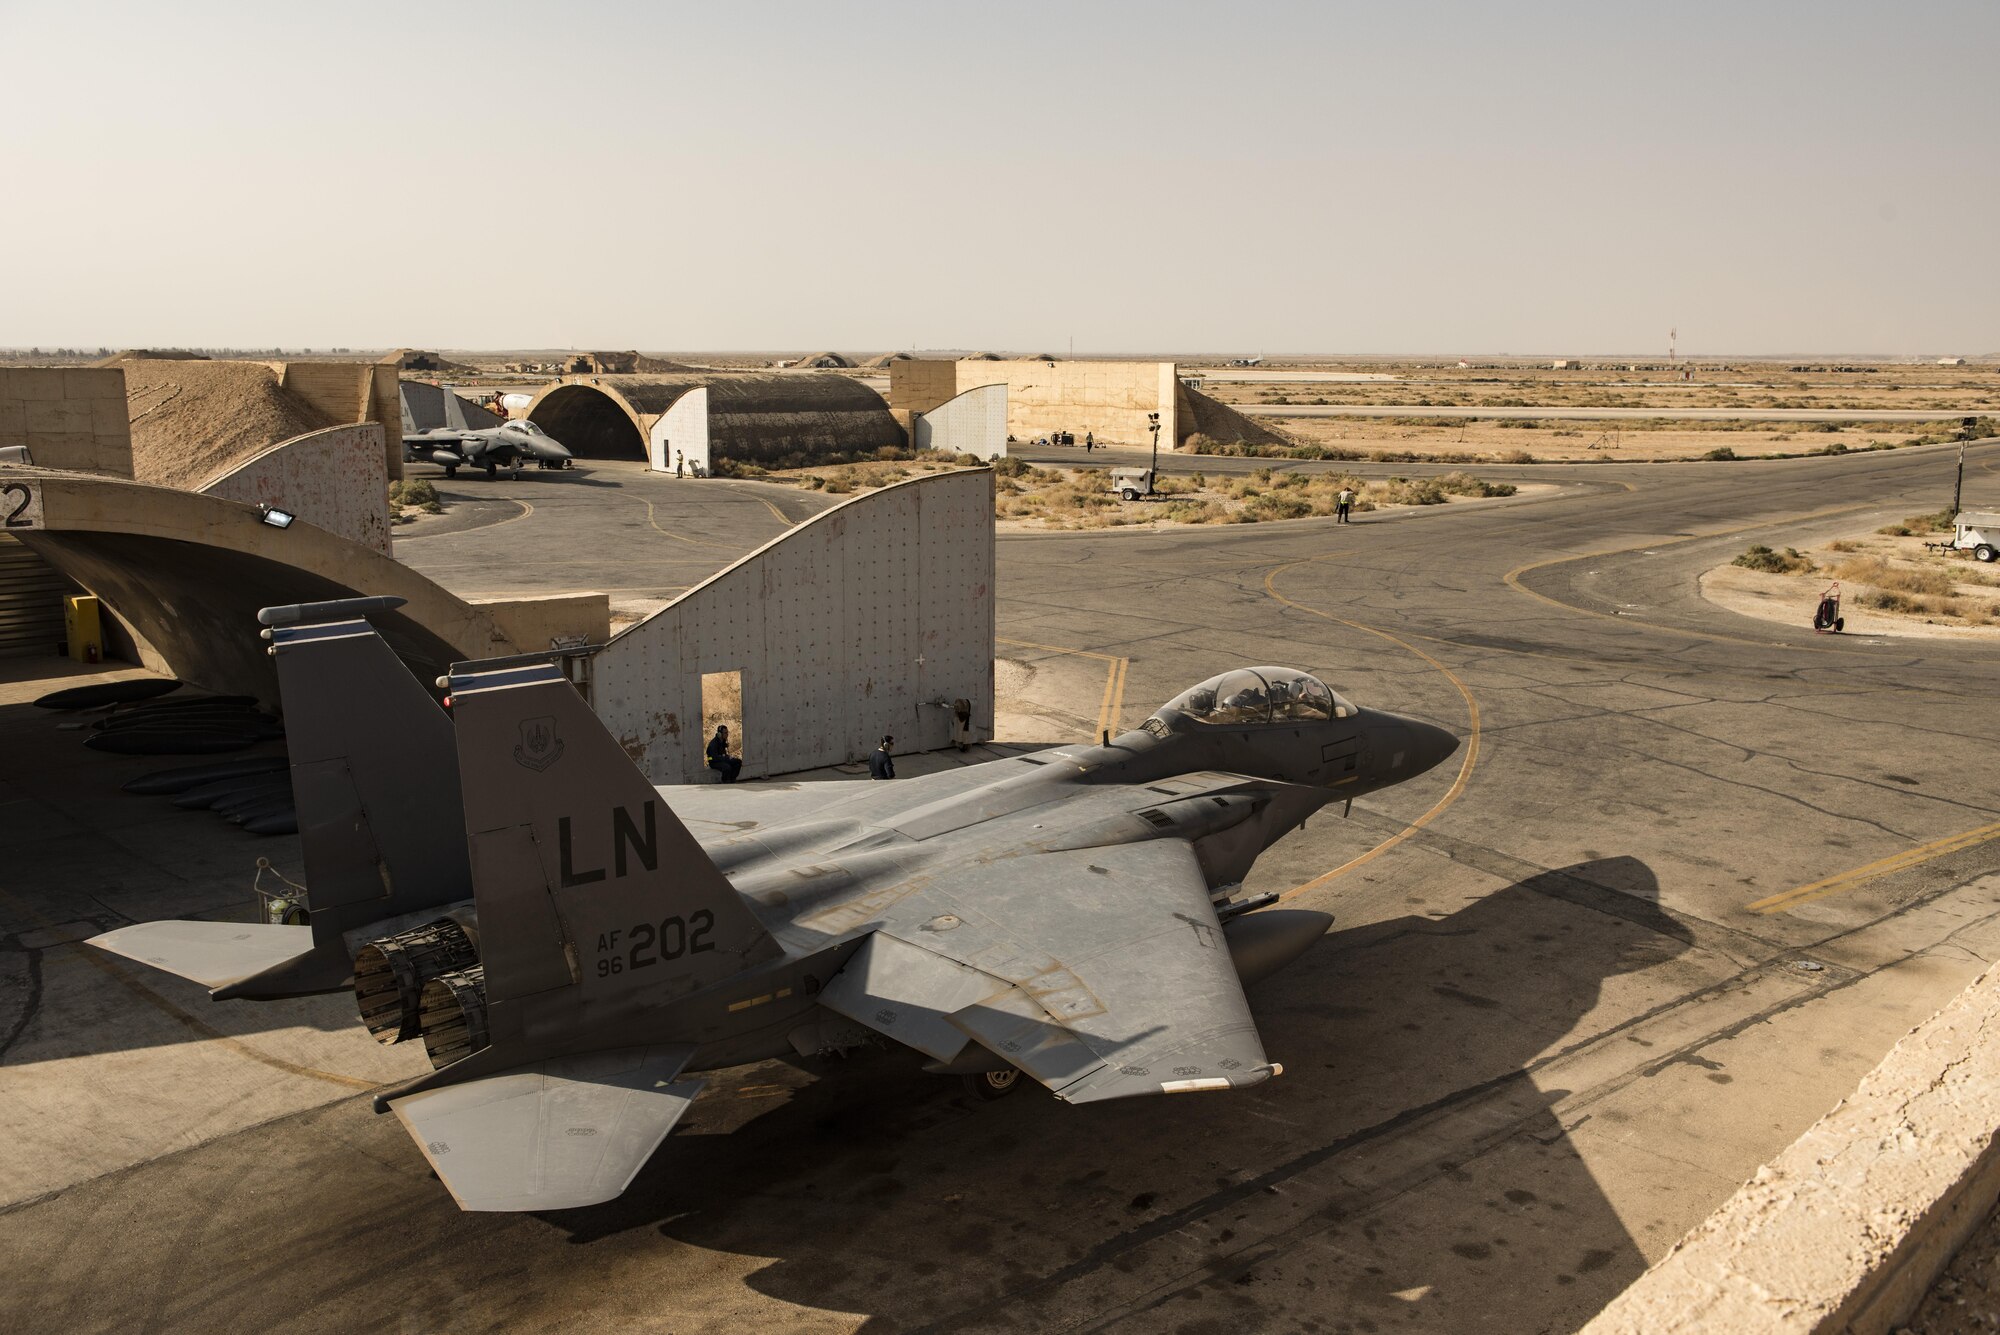 An F-15E Strike Eagle from the 492nd Expeditionary Fighter Squadron is prepared by maintainers assigned to the 332nd Expeditionary Maintenance Squadron prior to takeoff October 9, 2017 in Southwest Asia. The 492nd EFS flew thousands of sorties night and day for the last six months, providing close-air support for Coalition ground forces and neutralizing Islamic State forces in the region.